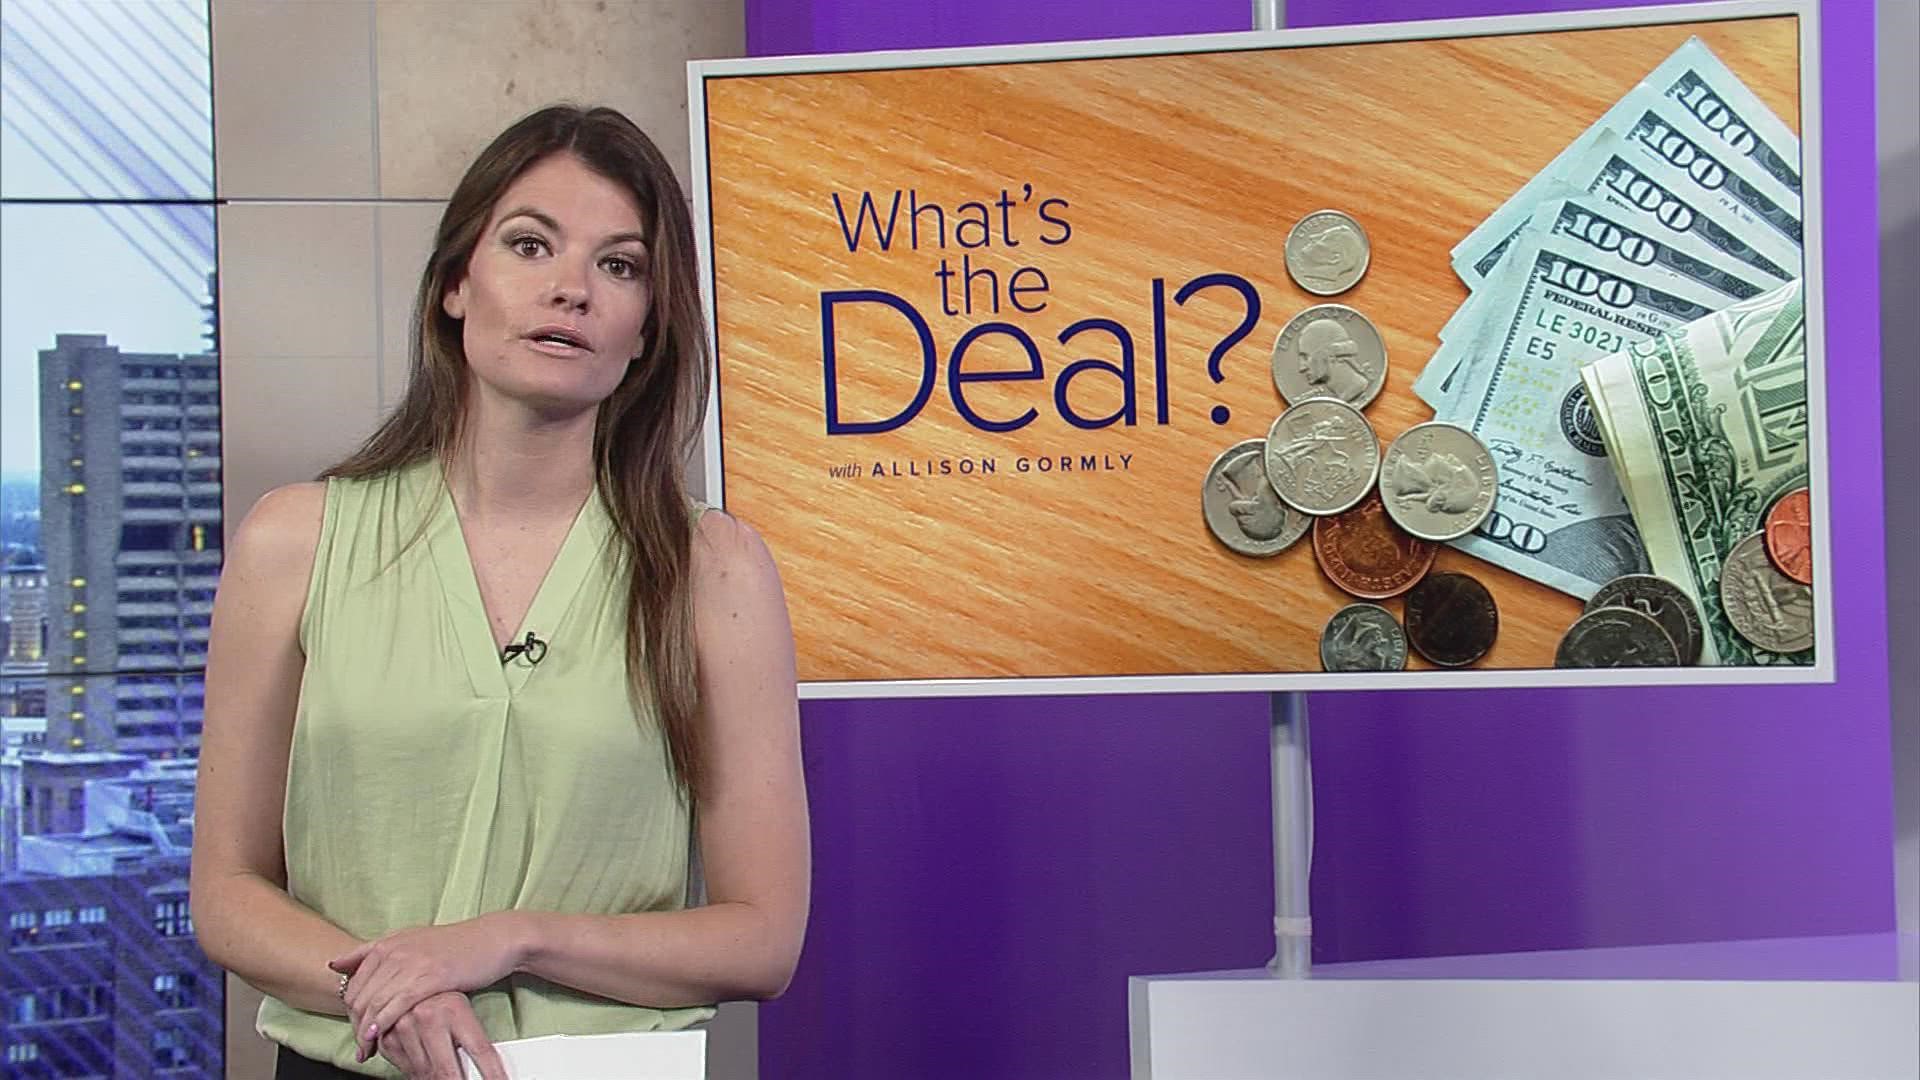 Allison Gormly tells us 'What's the Deal' with this new announcement.